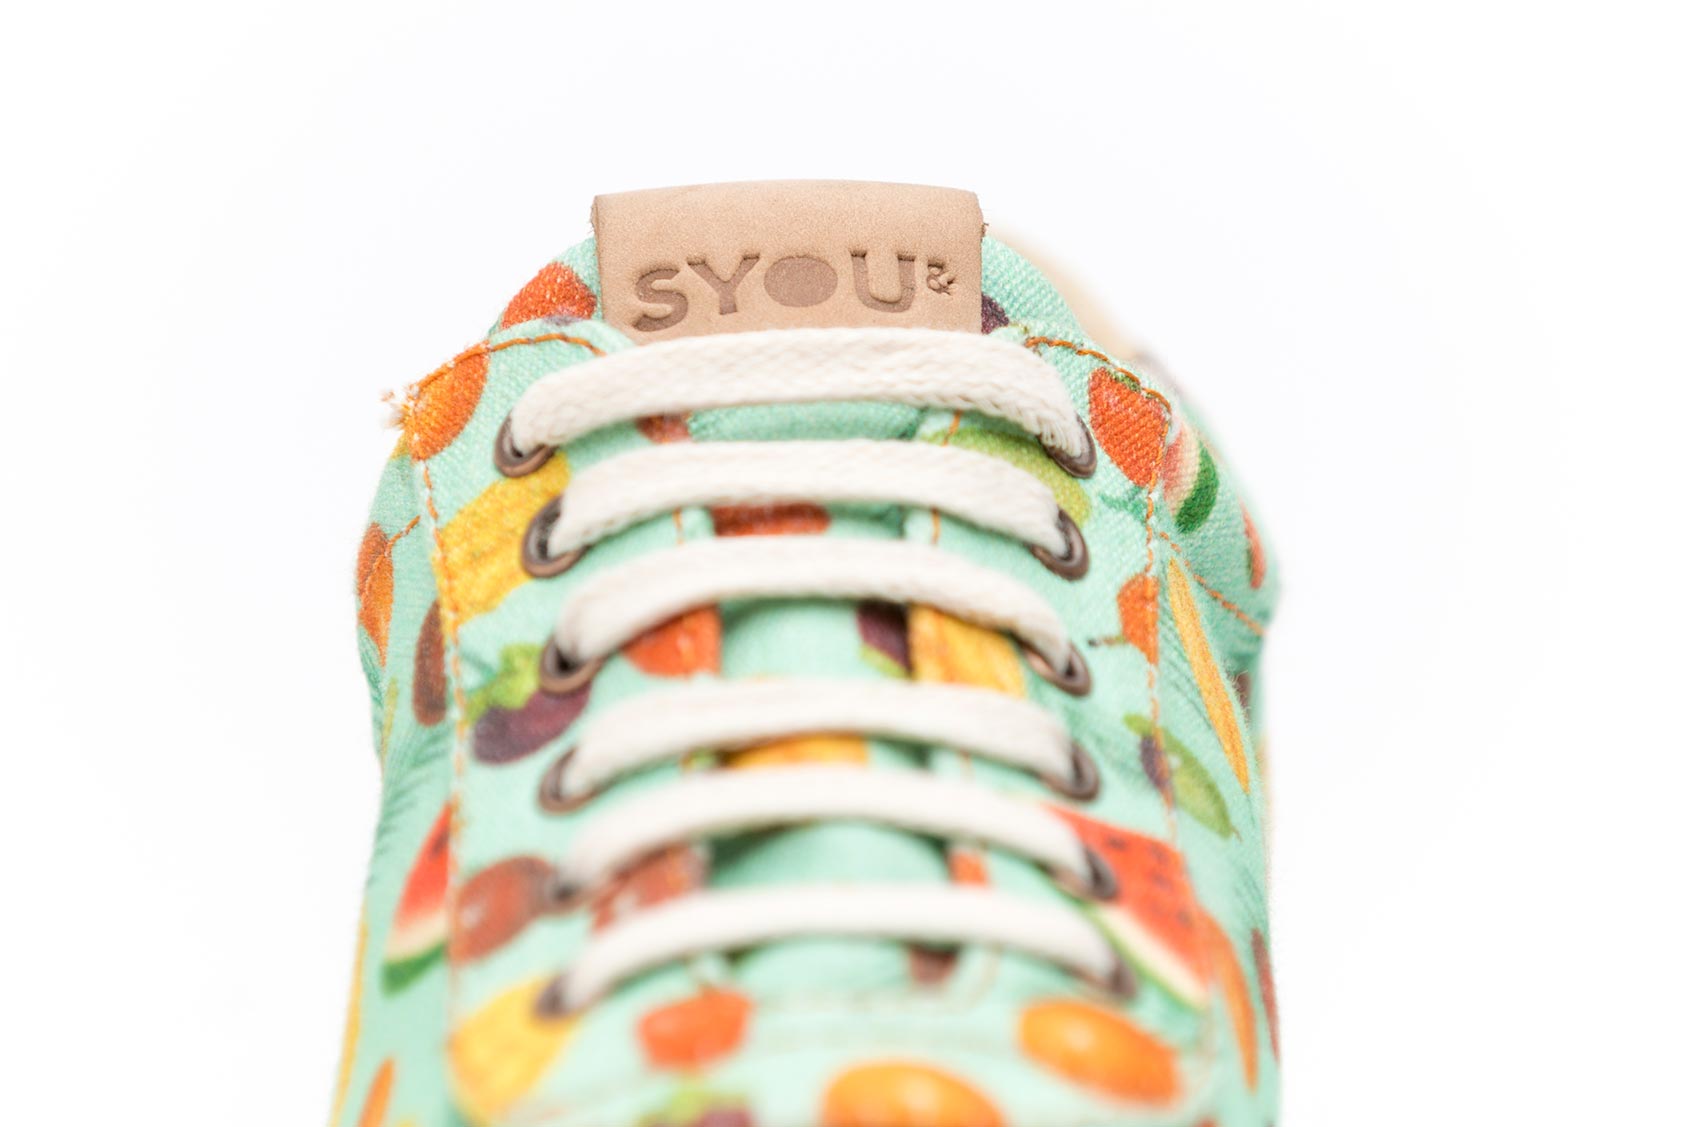 5 co8 colombian fruits sneakers syou